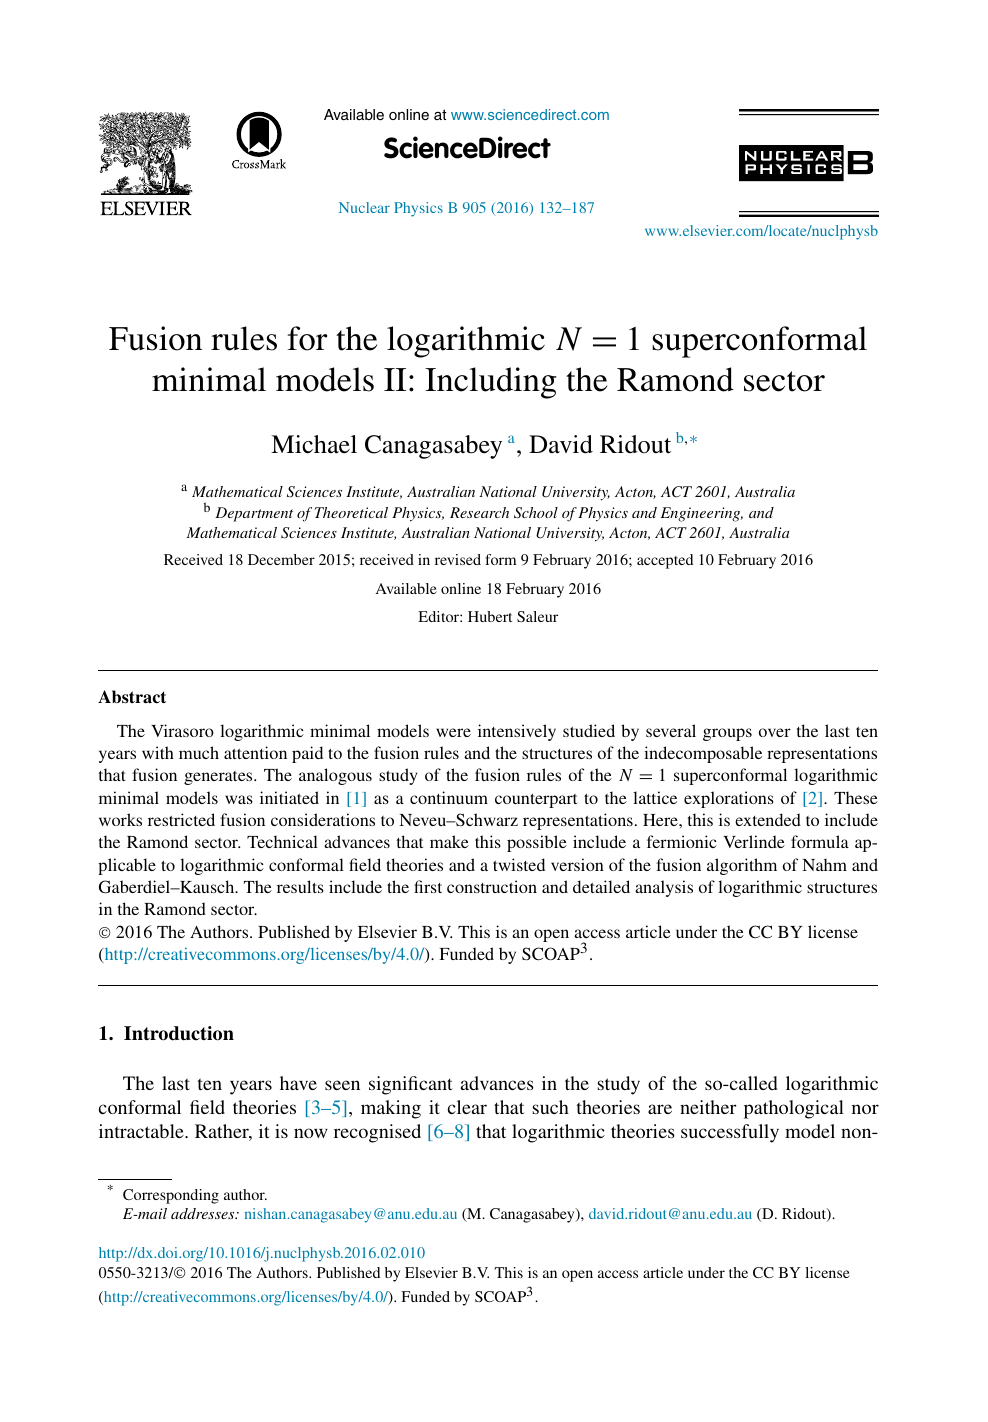 Fusion Rules For The Logarithmic N 1 Superconformal Minimal Models Ii Including The Ramond Sector Topic Of Research Paper In Physical Sciences Download Scholarly Article Pdf And Read For Free On Cyberleninka